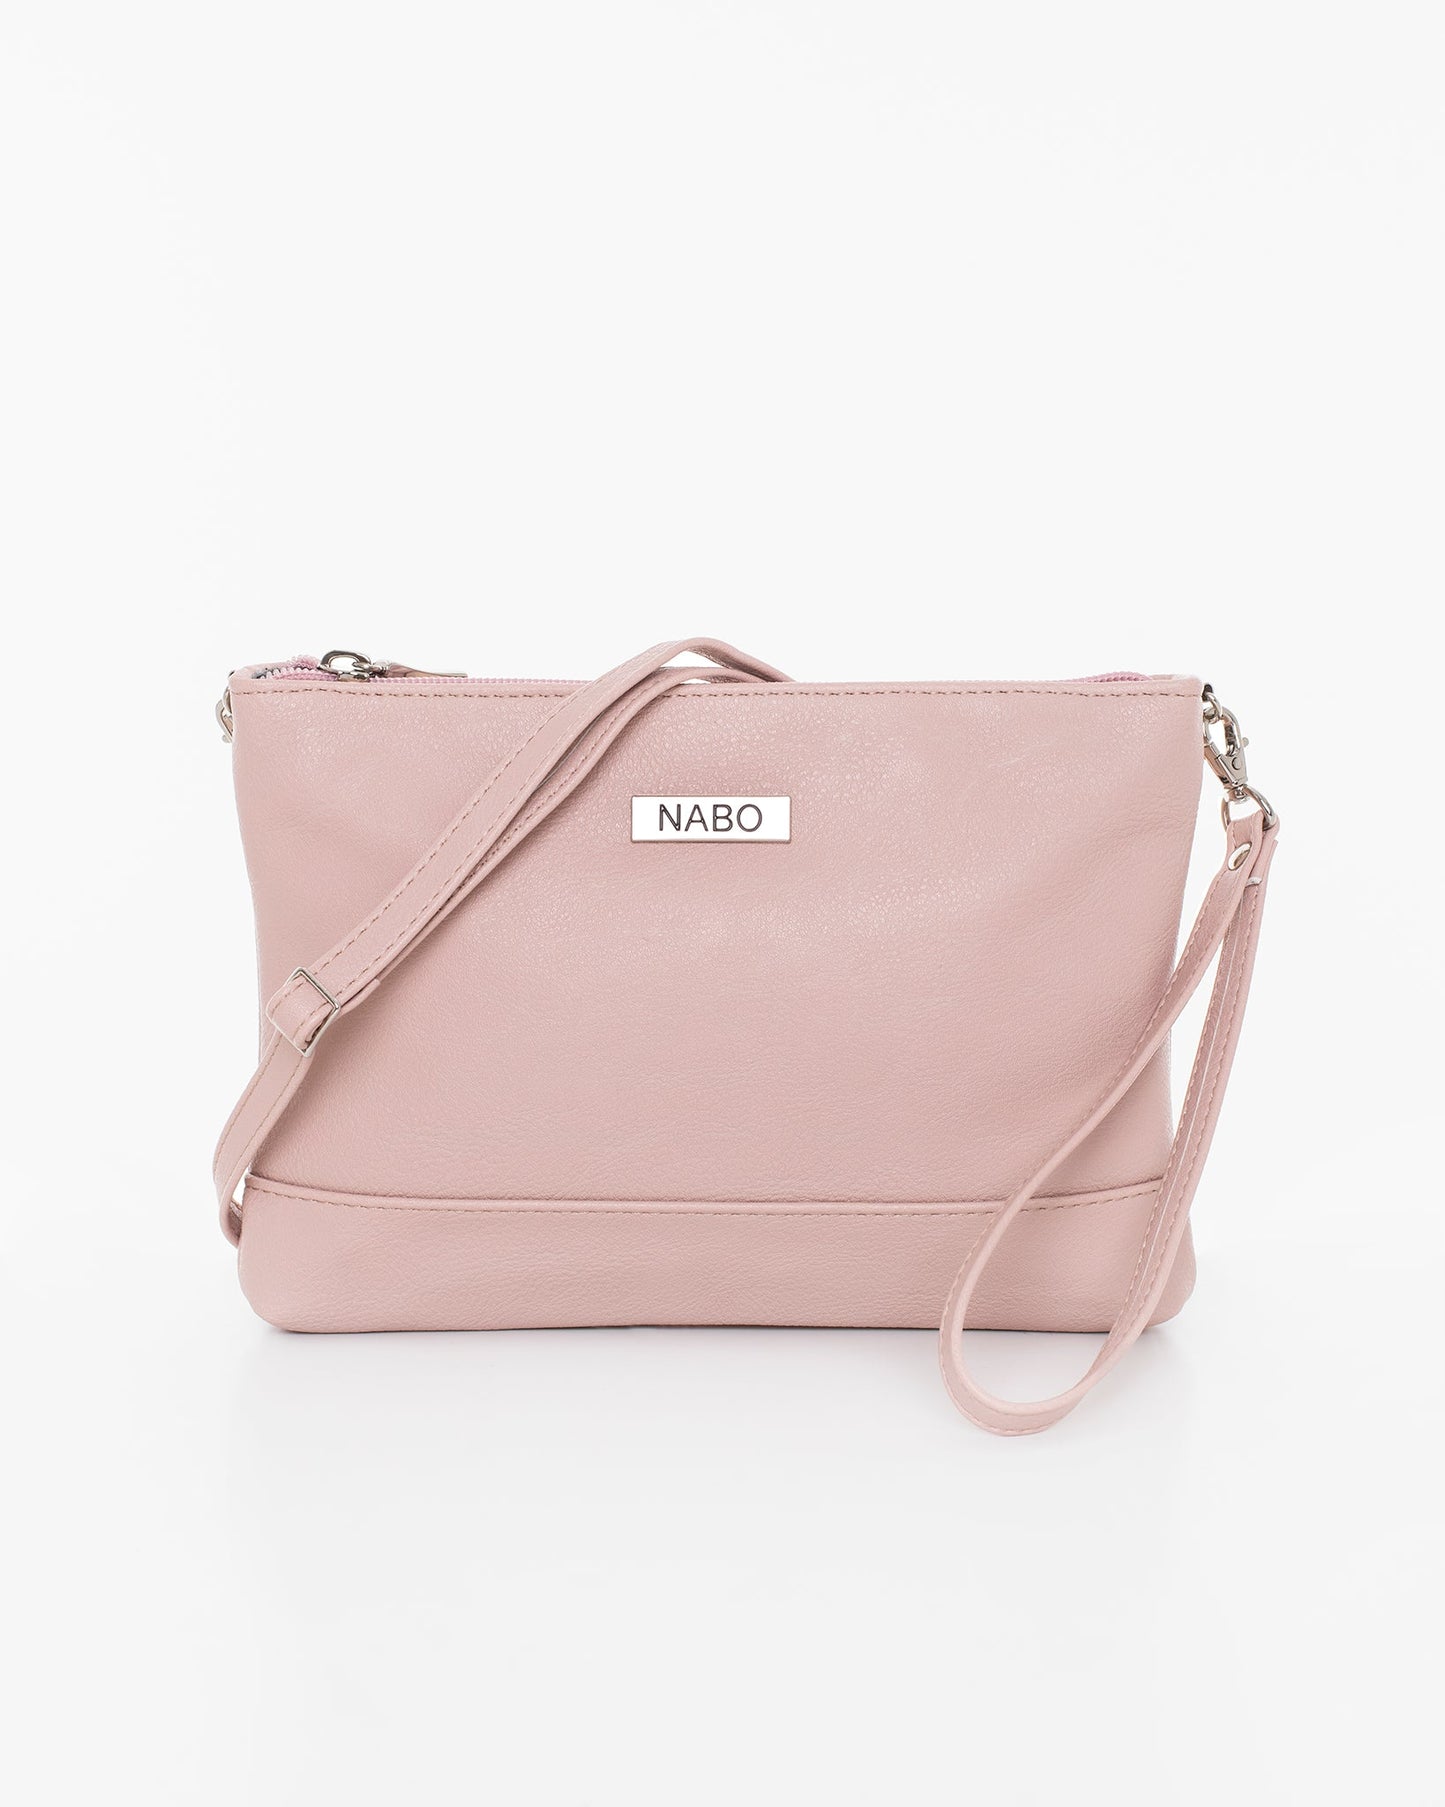 Shoulder Bag - Nude by Nabo: A pink leather purse with zippered pockets, removable shoulder and wrist straps. Dimensions: 22 x 15 x 3 cm. Made in Finland.